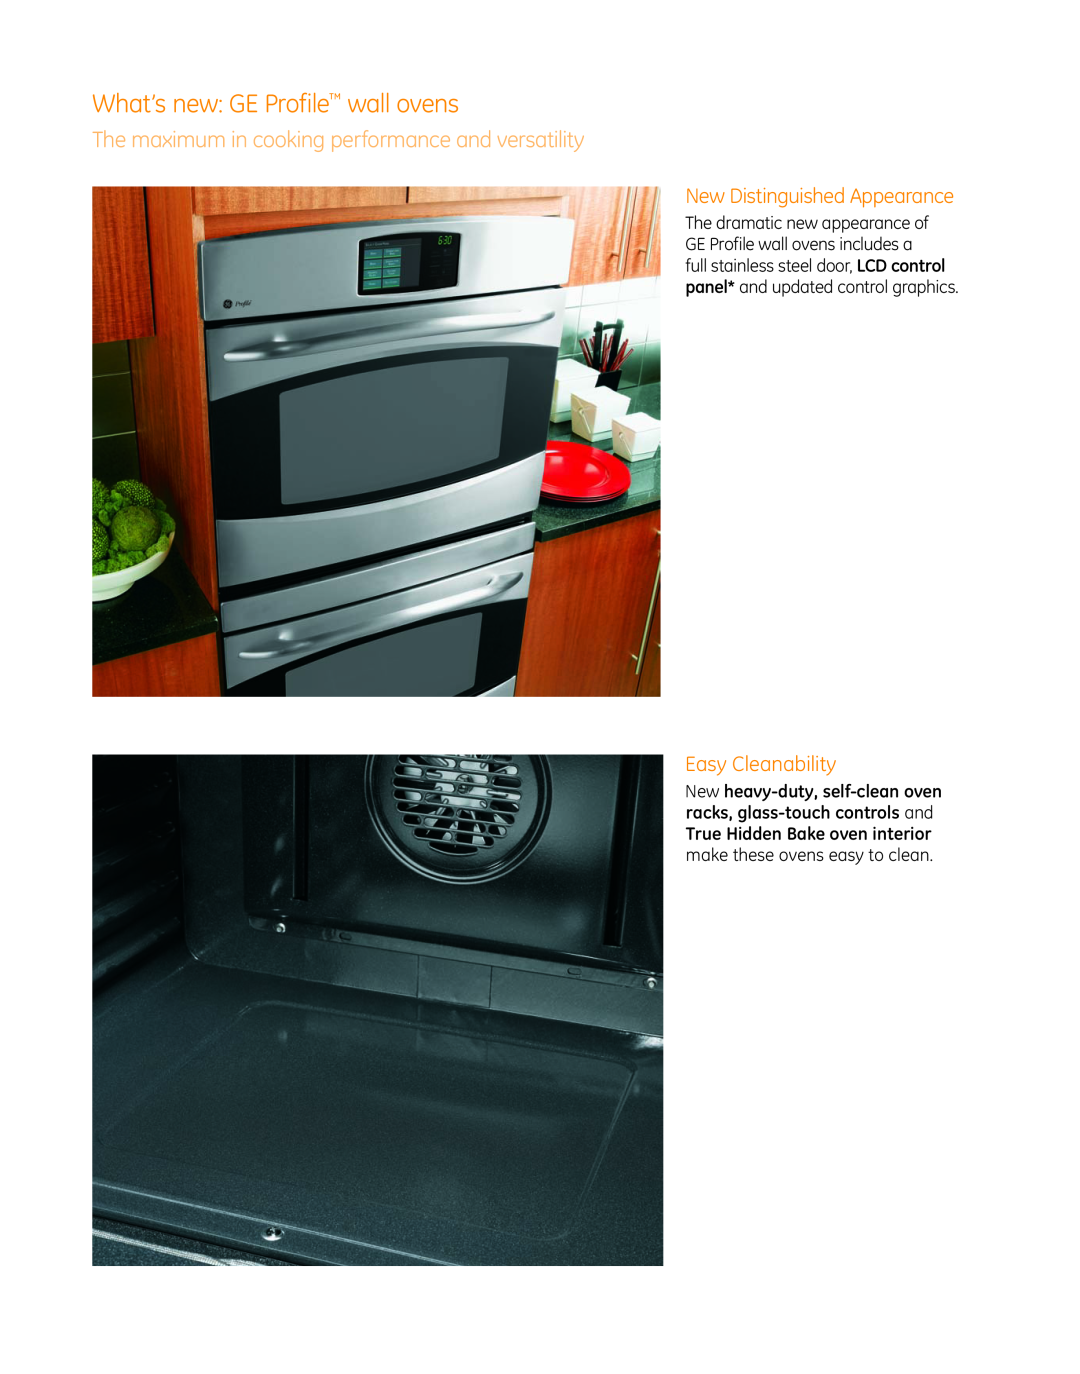 GE PT960, PT920 manual What’s new GE Profile wall ovens, New Distinguished Appearance, Easy Cleanability 